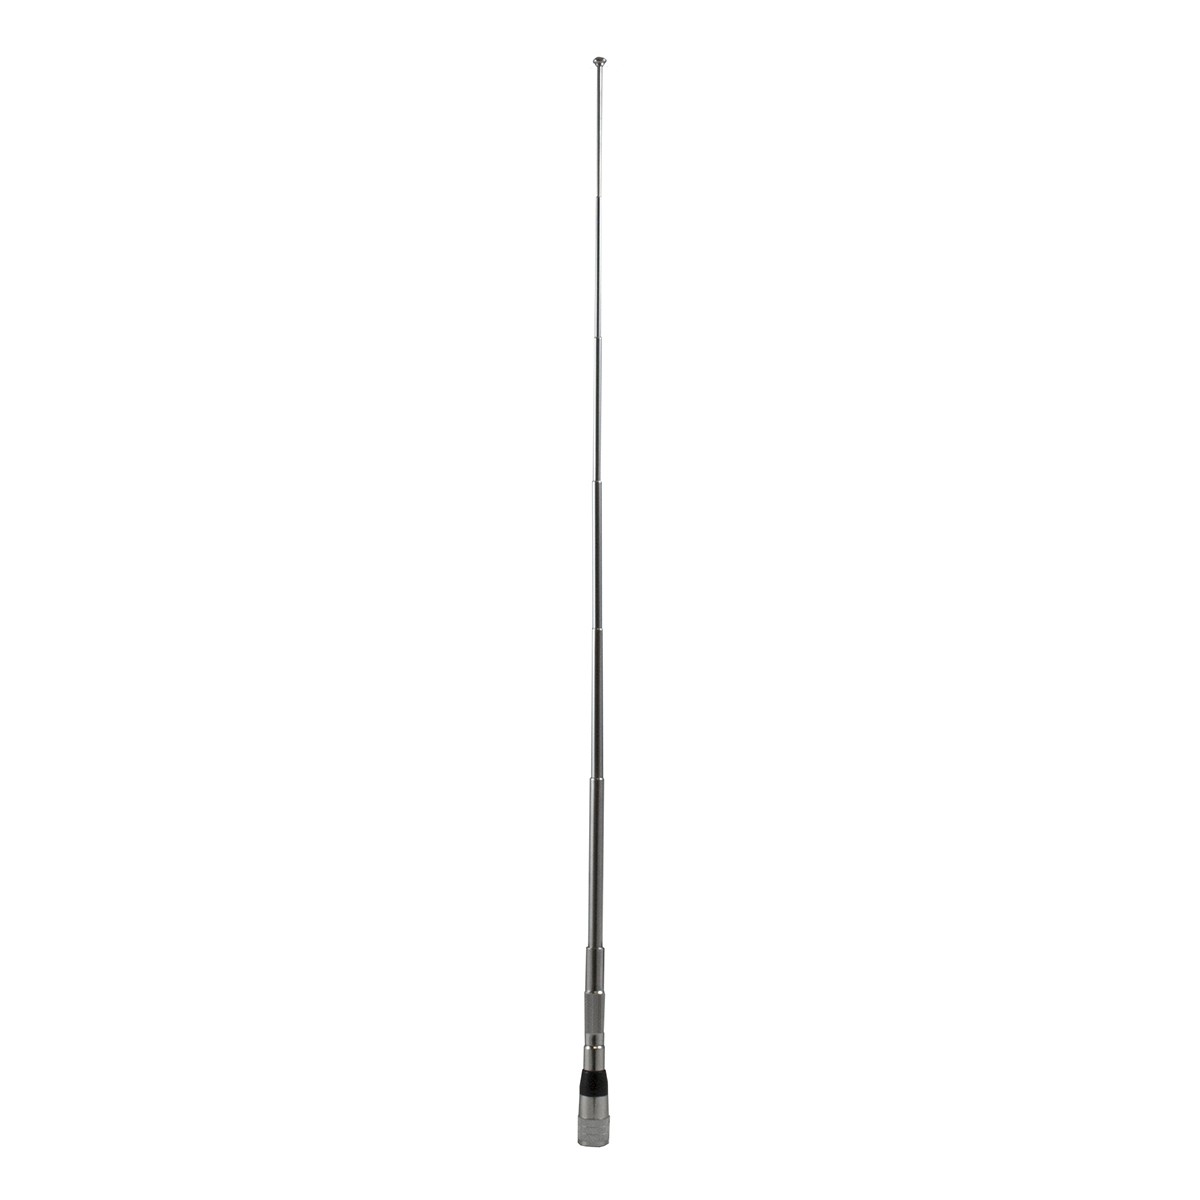 The Buzzard's Roost Extended Range Metal Folding Antenna - BUZZ-